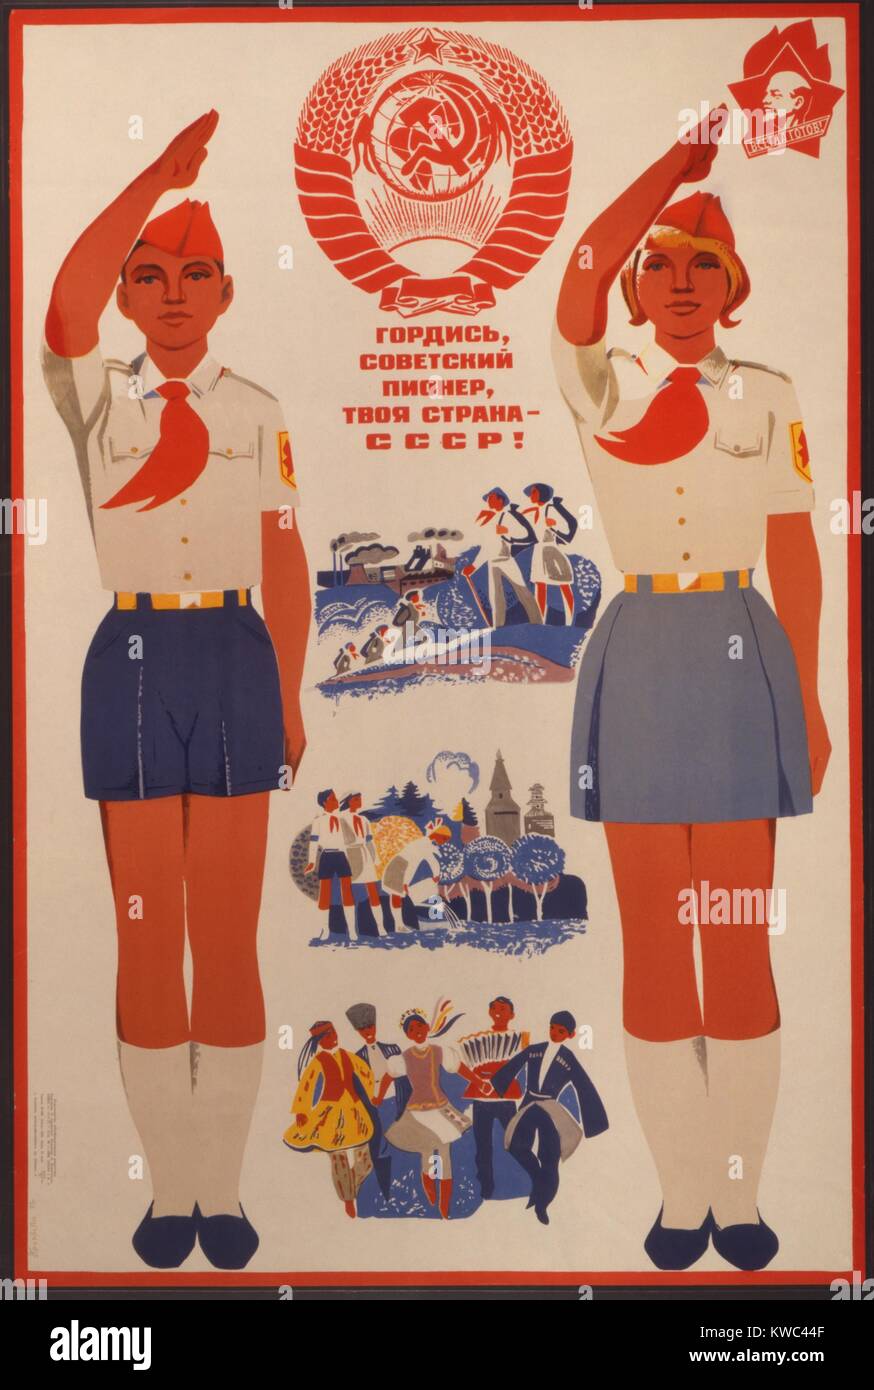 Soviet Russian poster celebrating the Young Pioneer Organization. Illustration depicts teenage boy and girl wearing red scarf and scouting uniforms giving the Pioneer salute. Three scenes between them depicting Young Pioneer activities. 1971. (BSLOC 2015 14 7) Stock Photo